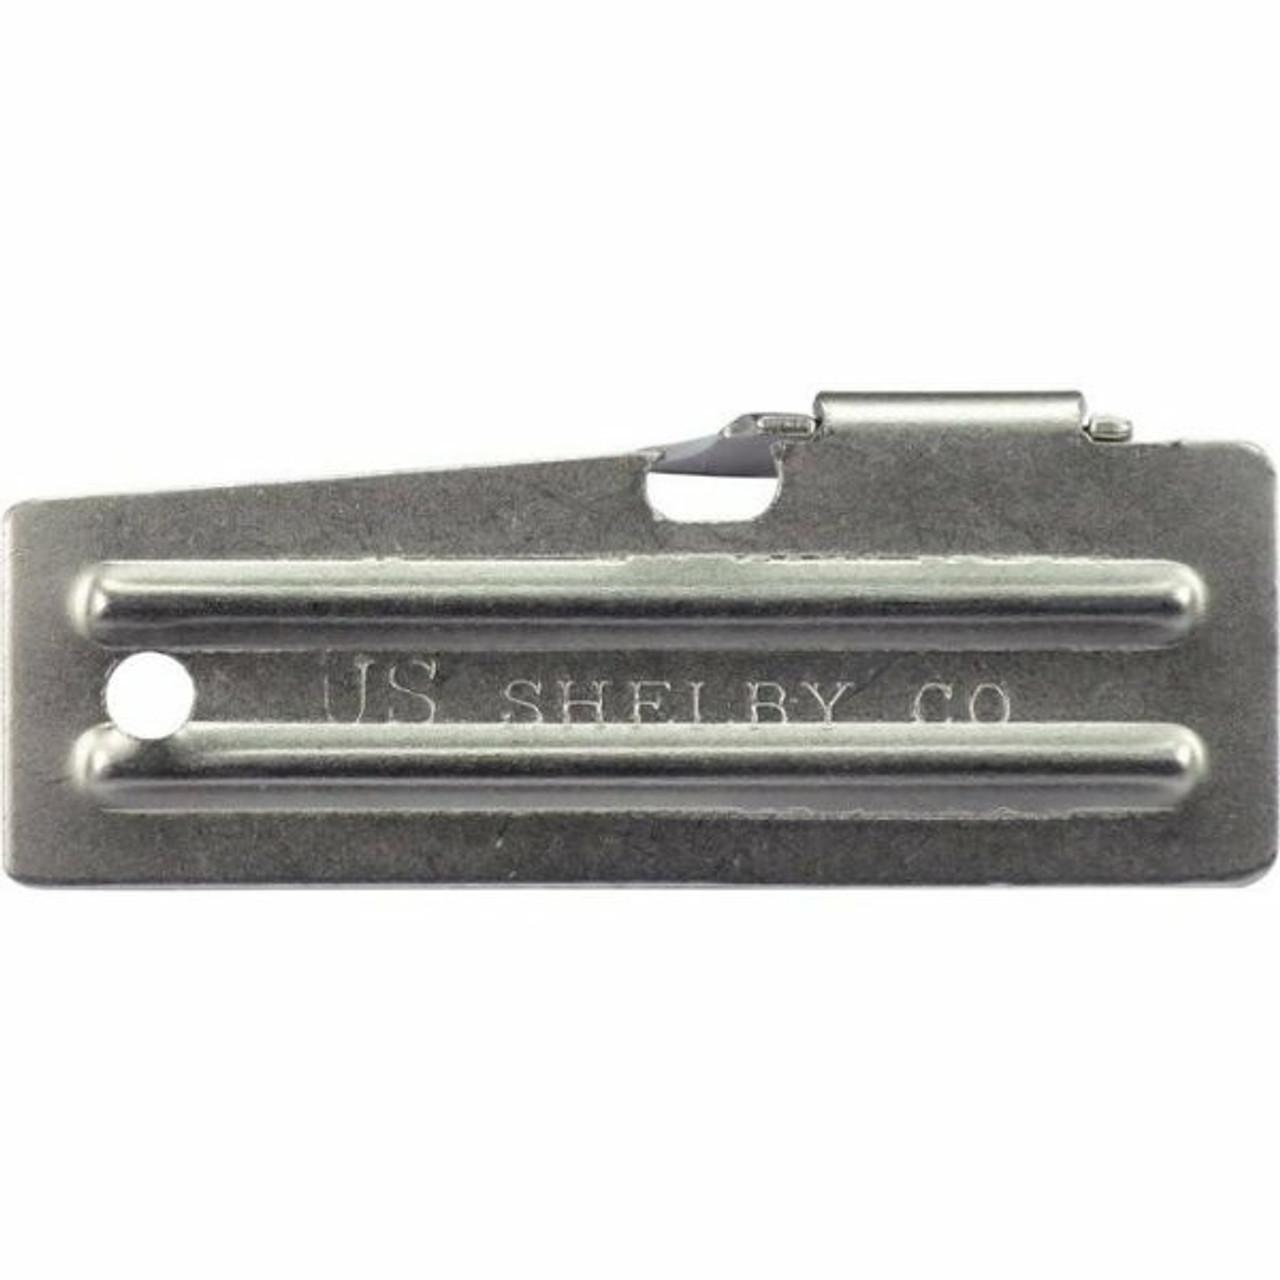 P38 & P51 Can Opener 10 Pack - 5 of Each US Shelby CO U.S Made New Survival  Gear